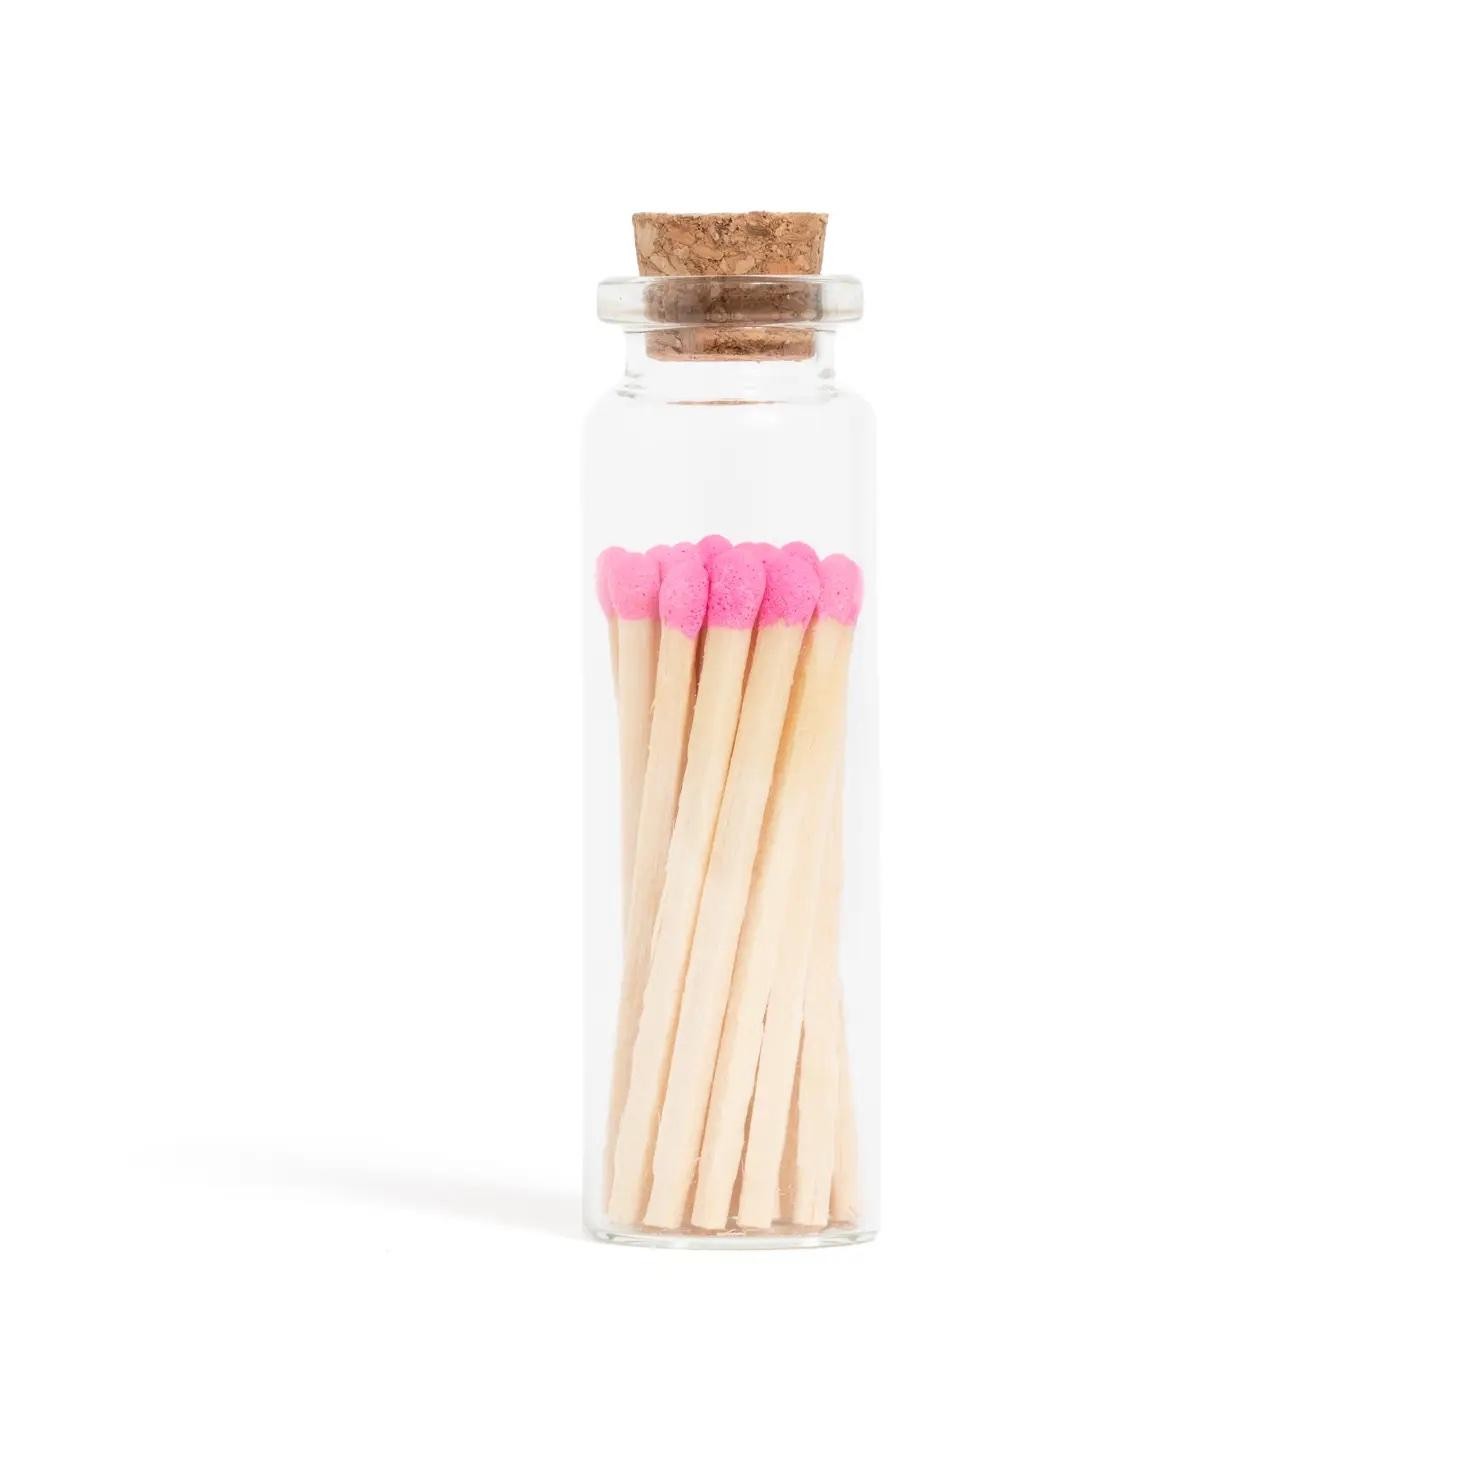 THE SHOP Pink corked vial matches